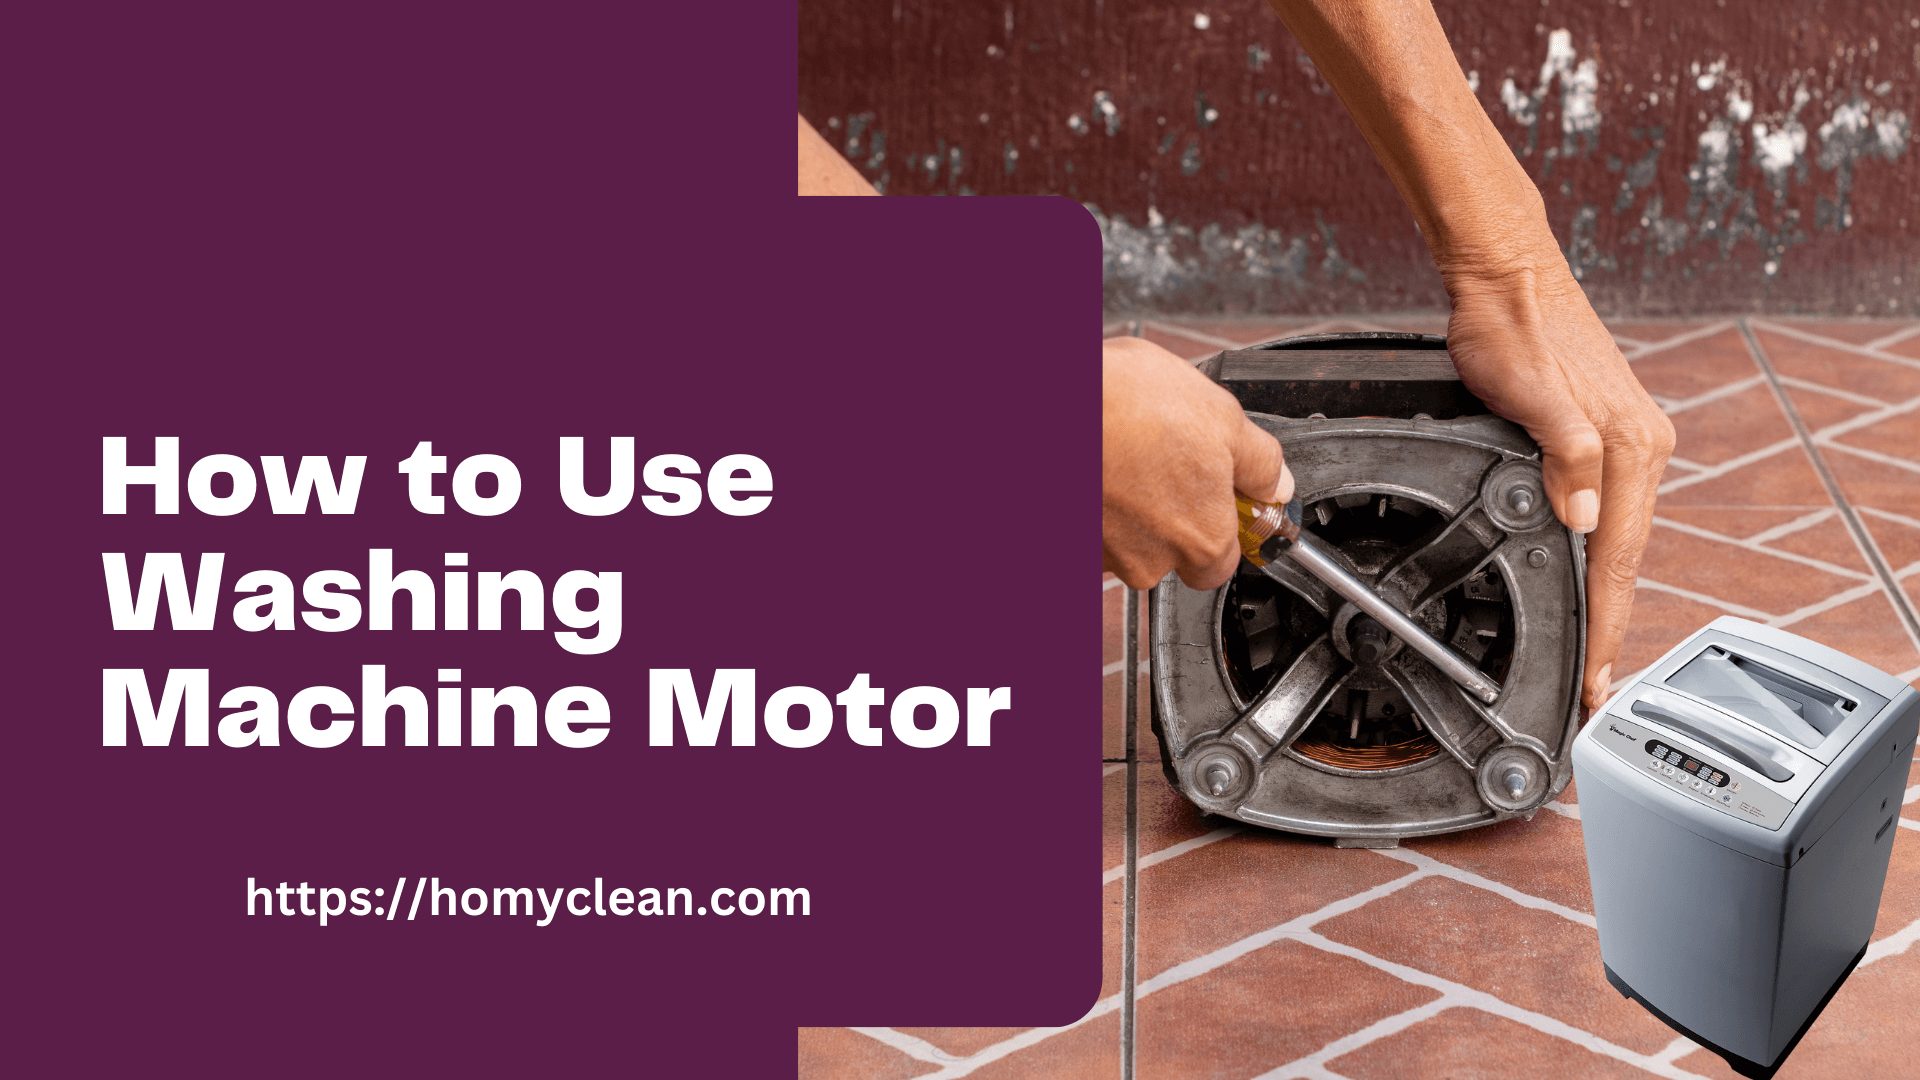 How to Use Washing Machine Motor: A Step-by-Step Guide